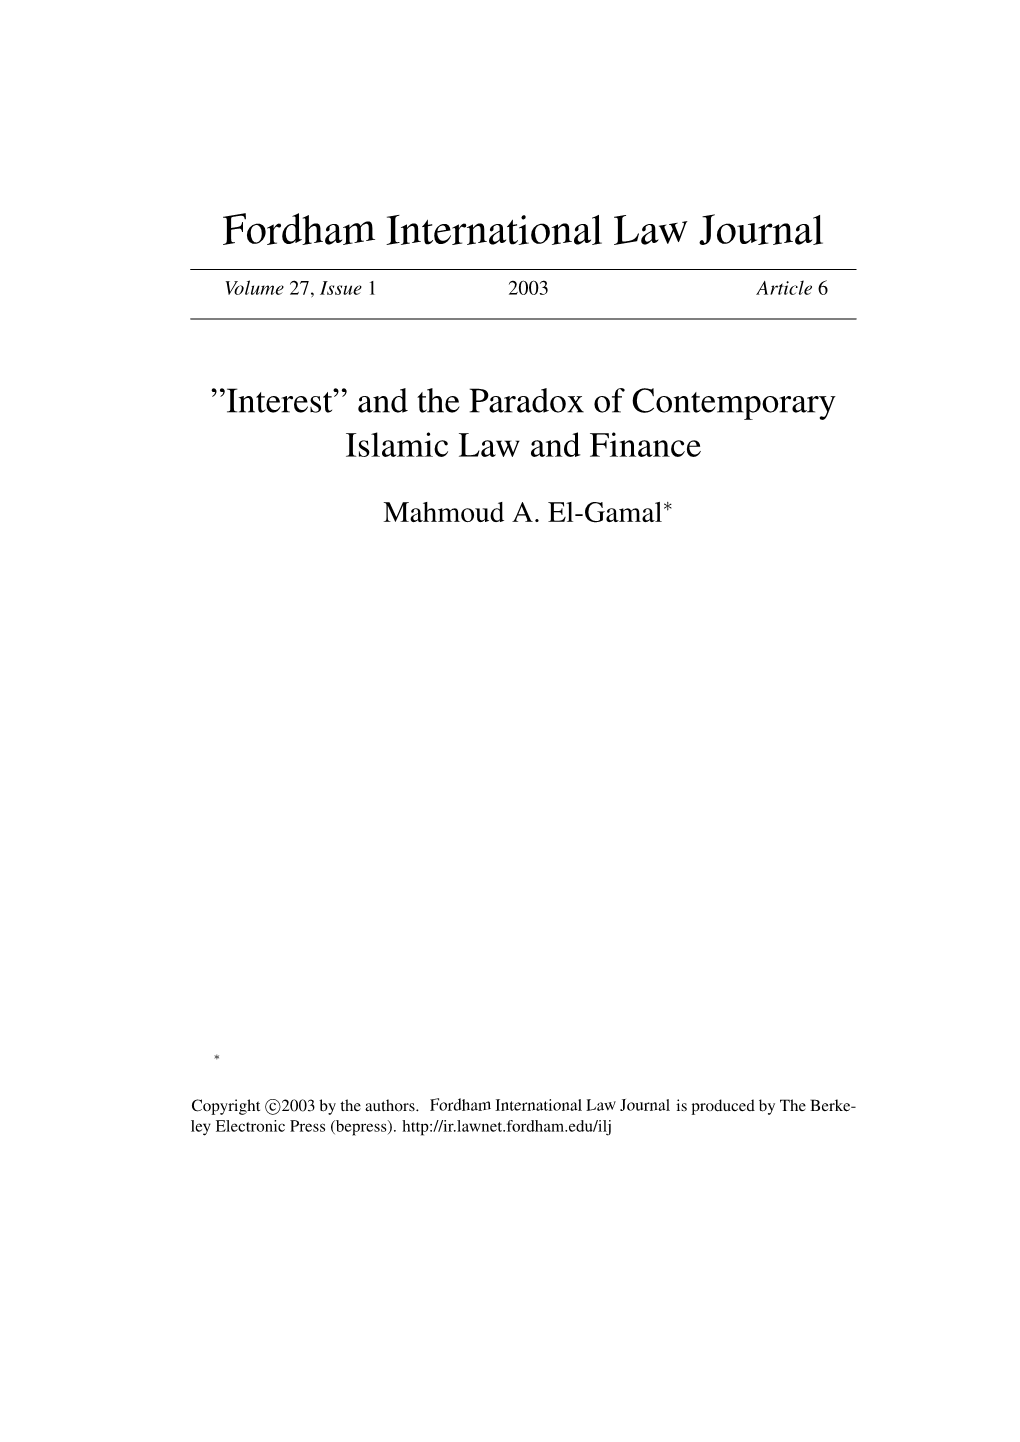 "Interest" and the Paradox of Contemporary Islamic Law and Finance